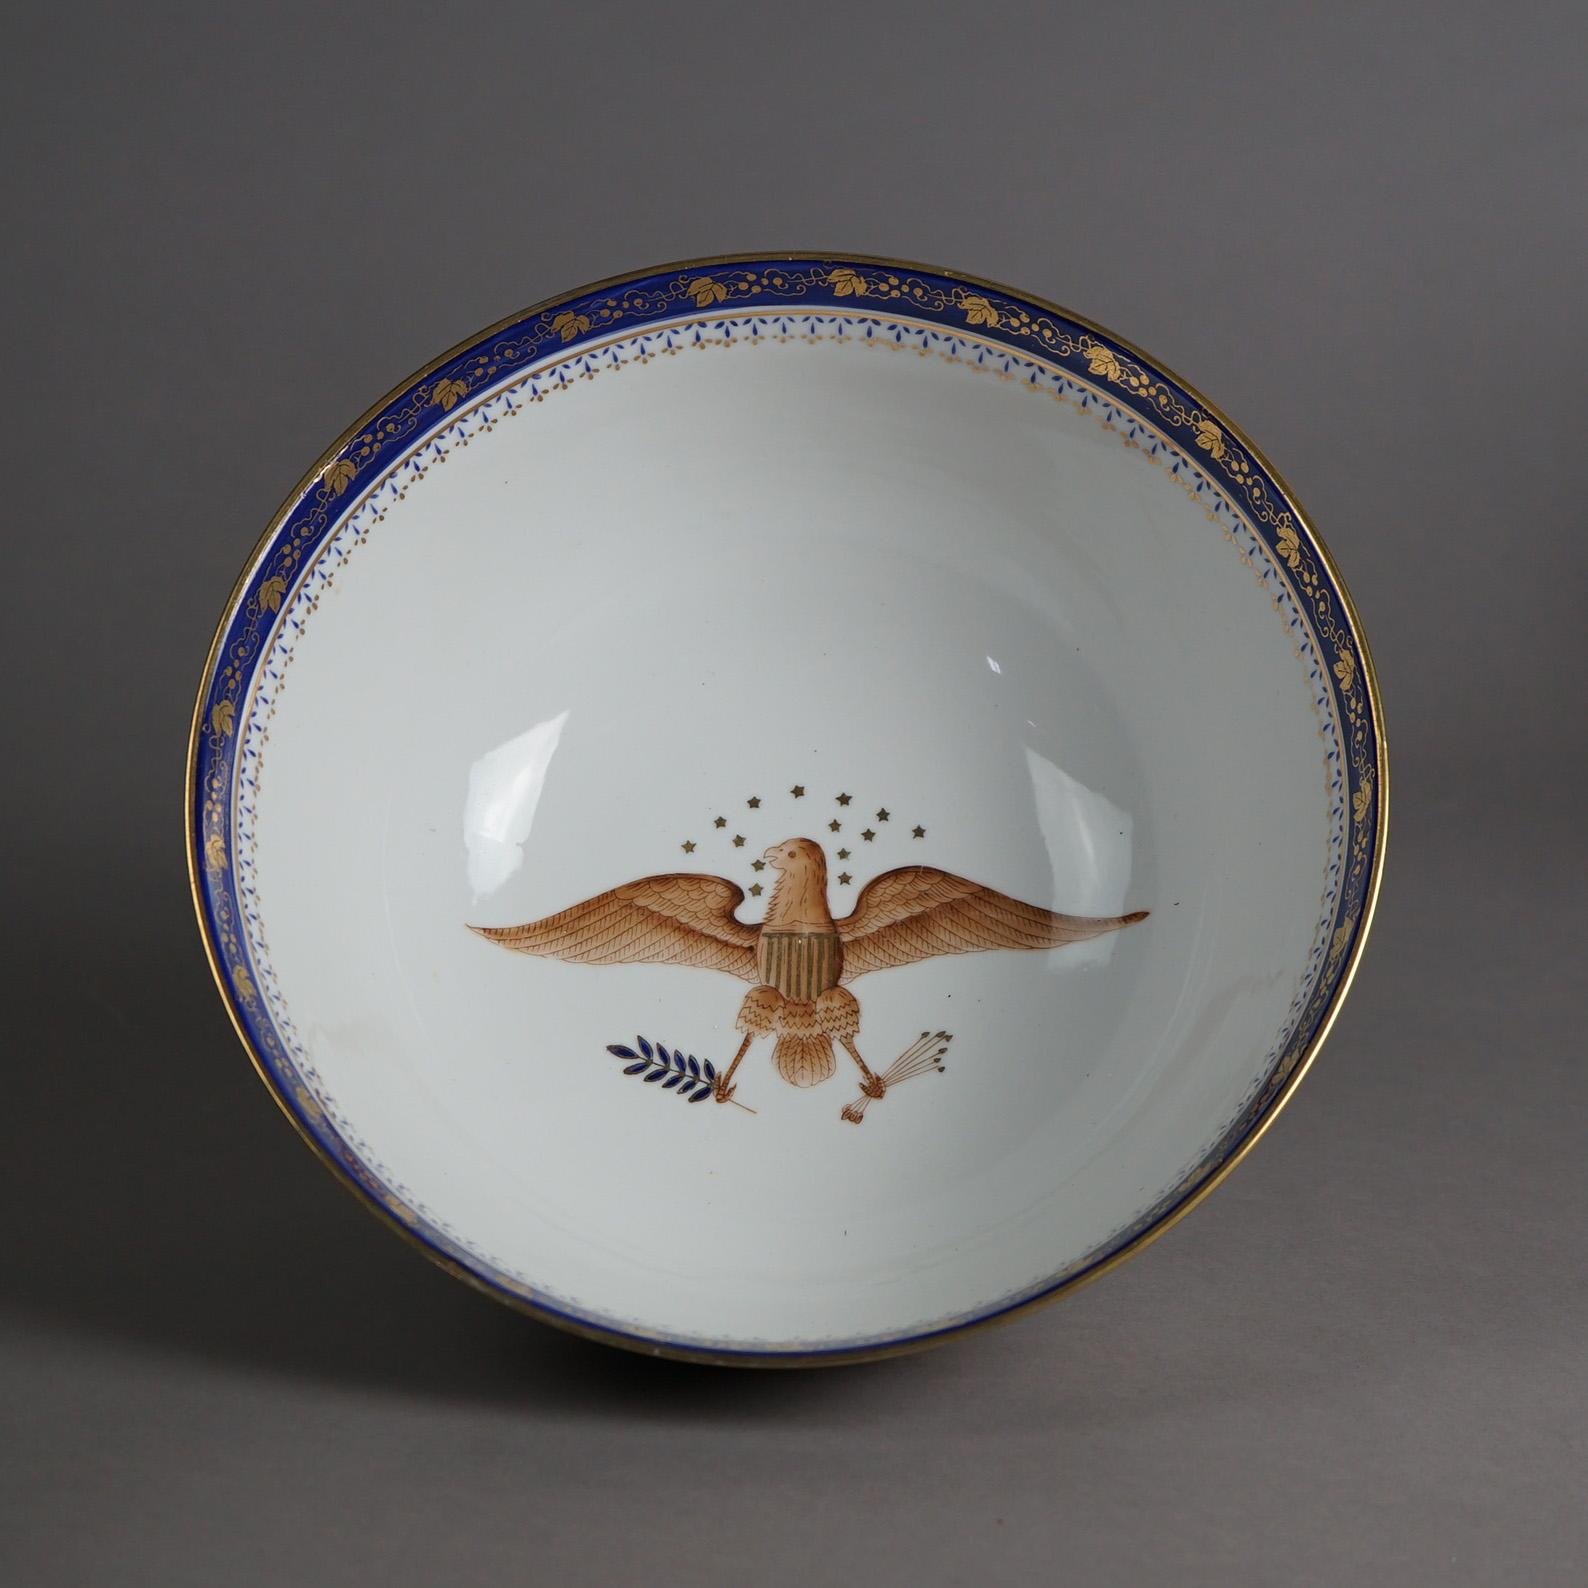 An antique Chinese Export bowl as displayed in the Diplomatic Reception Rooms, U.S. Department of State, Washington, D.C. offers porcelain construction with hand painted armorial American Eagle eagle (left claw with an olive branch representing